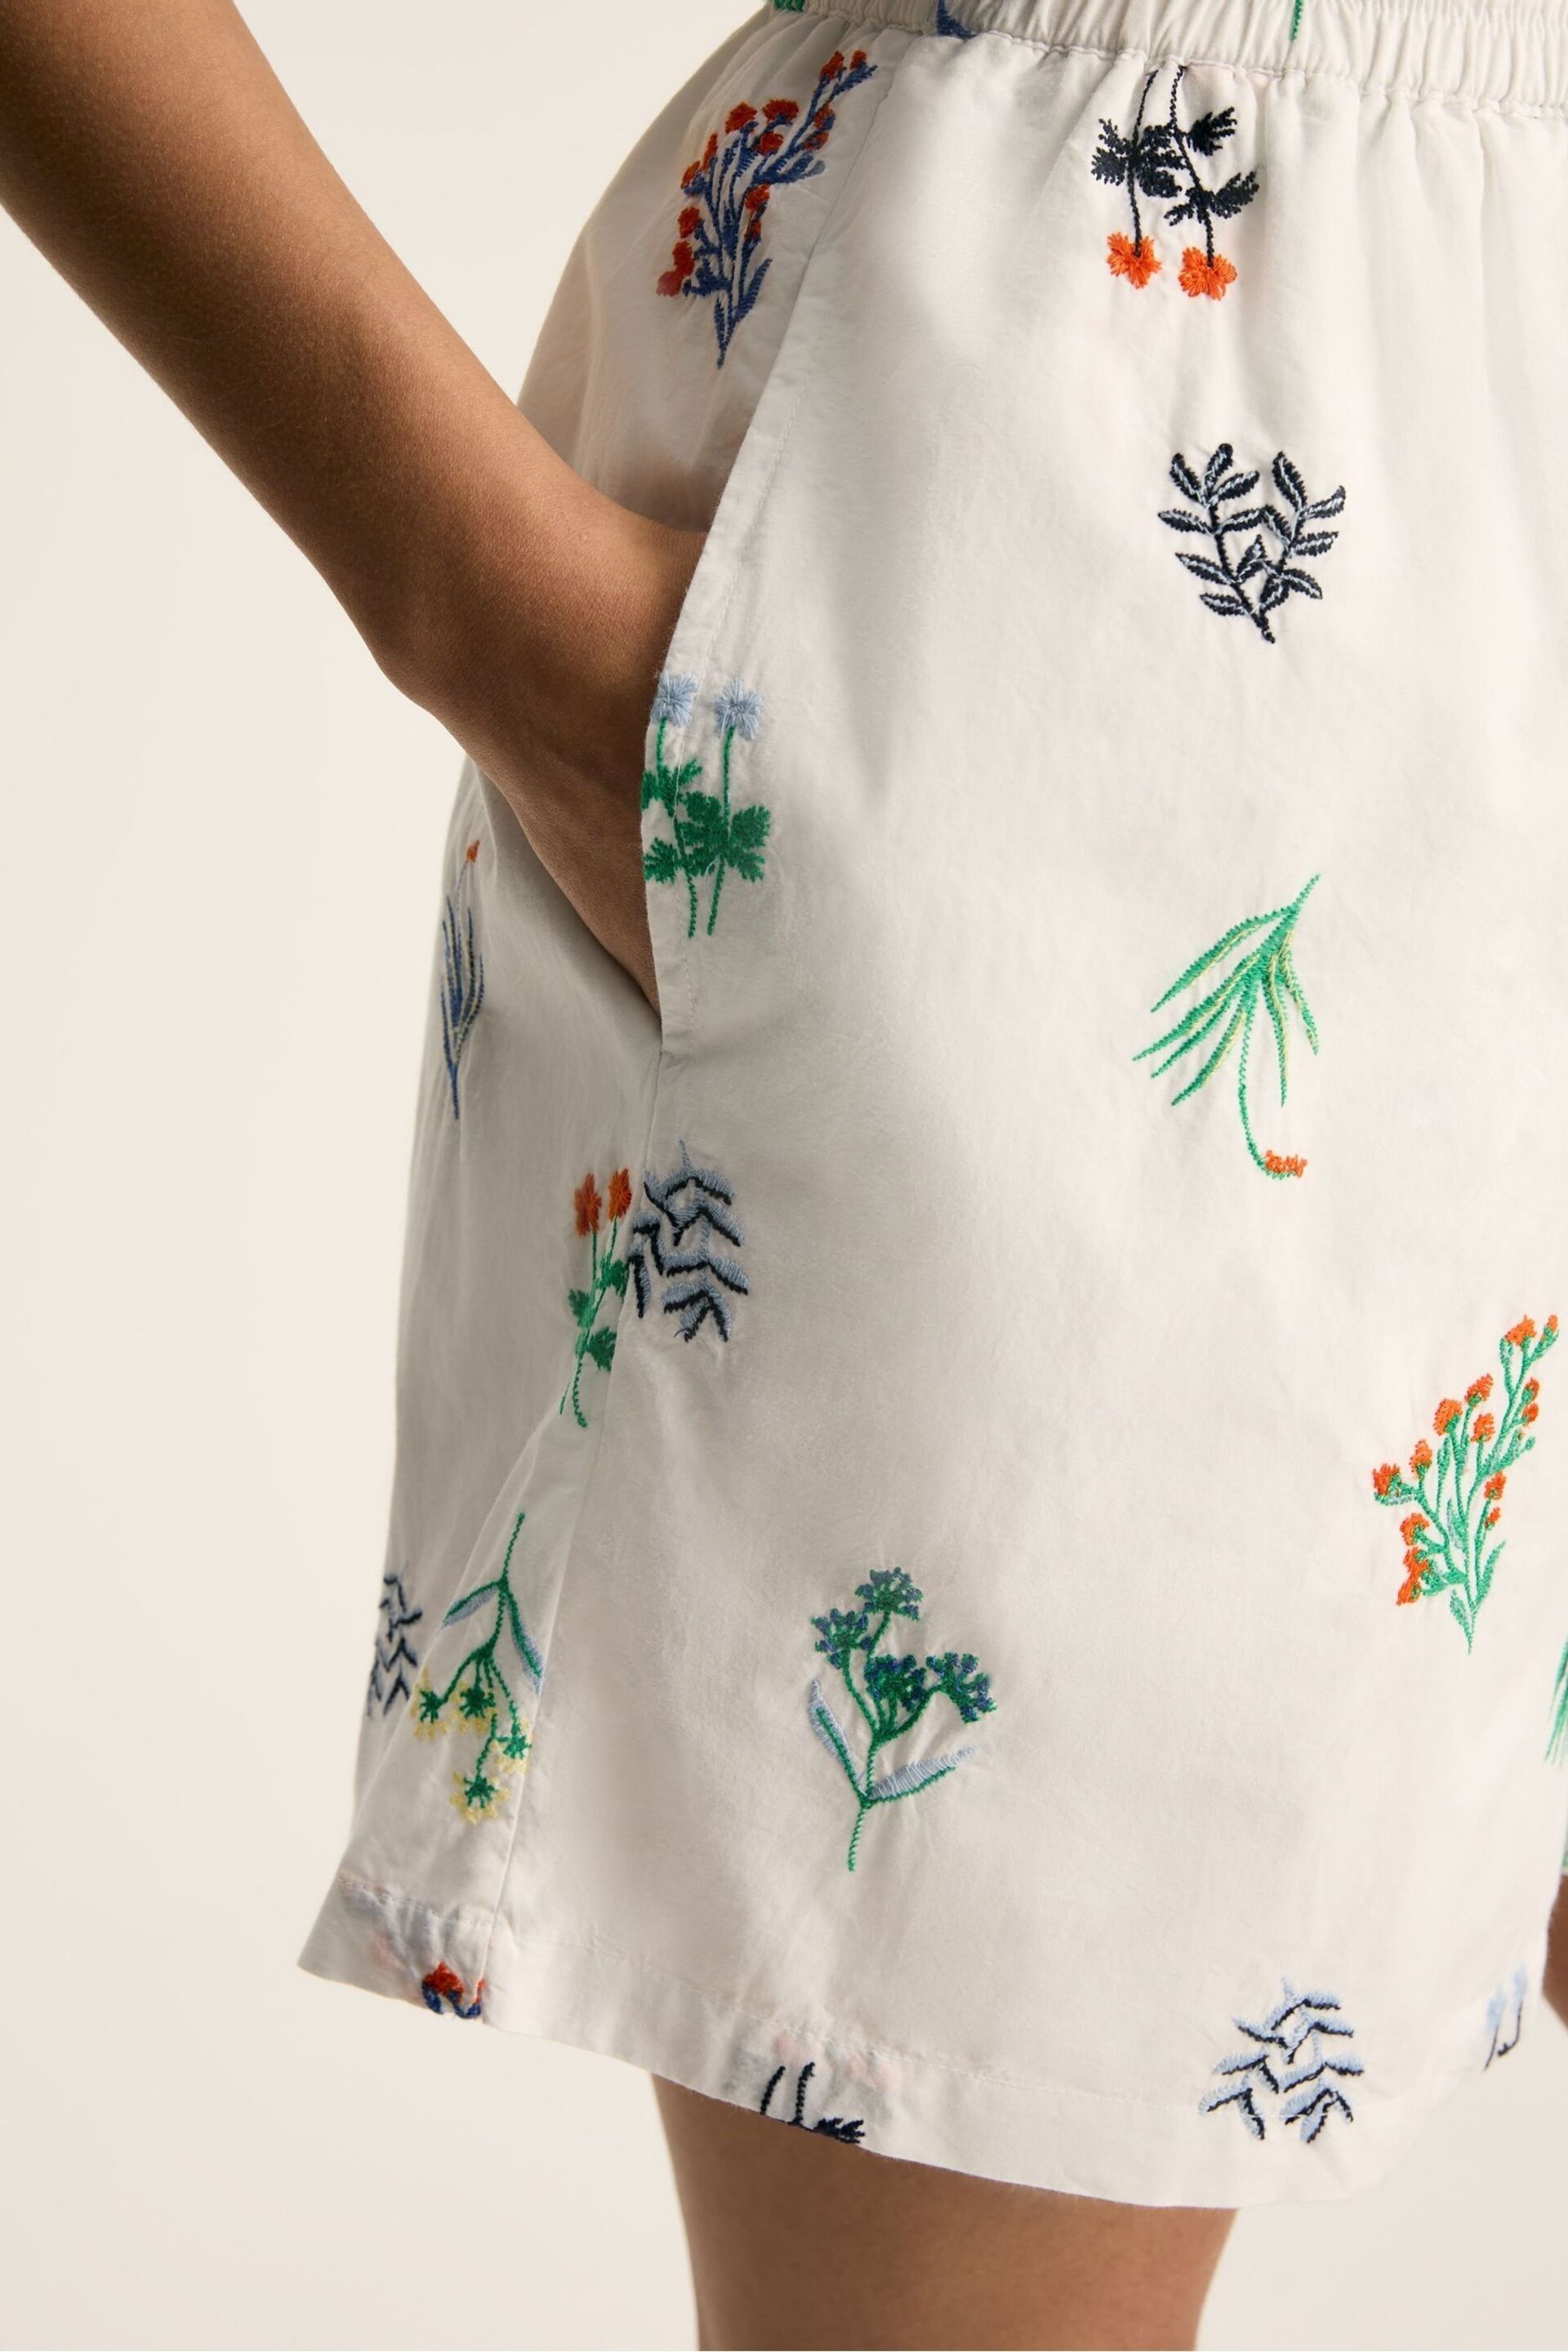 Joules Iris White Ground Embroidered Shorts - Image 7 of 7